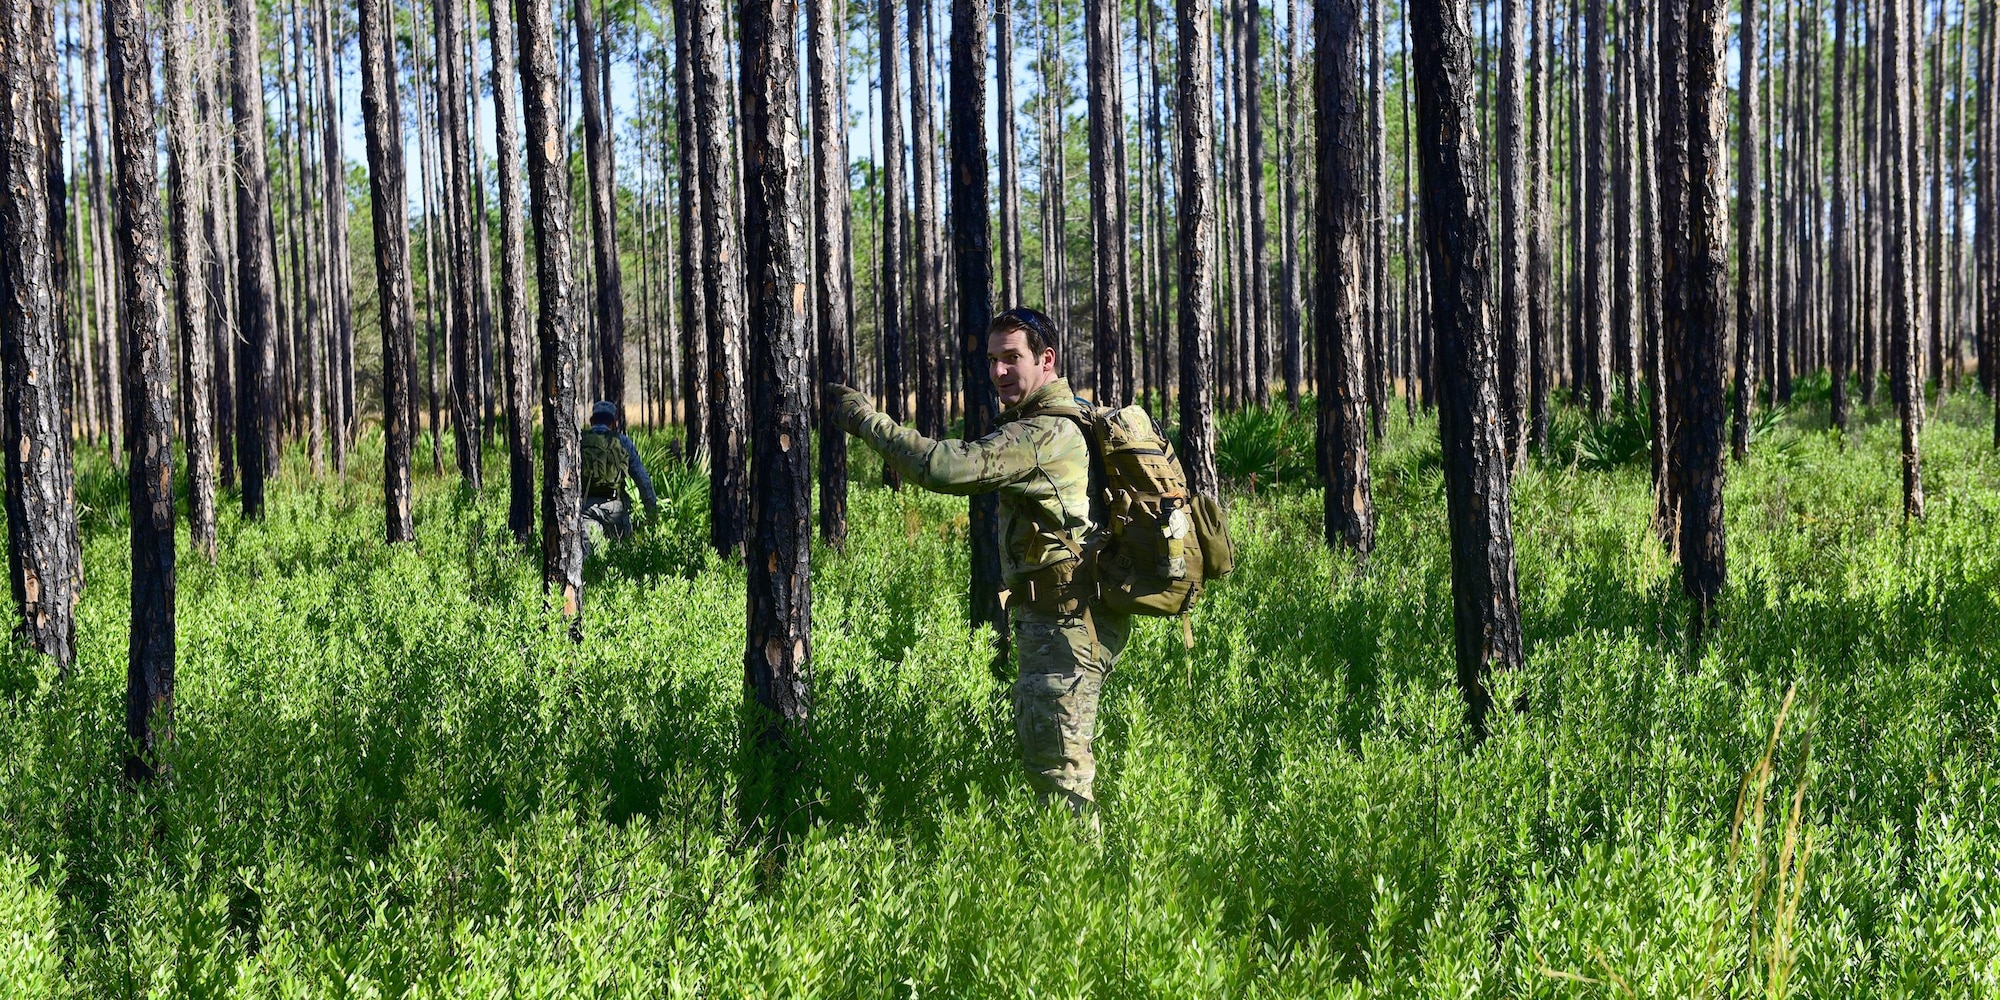 U.S. Staff Sgt. Jonathan Buchanan, 325th Operations Support Squadron non-commissioned officer in-charge of survival, evasion, resistance and escape (SERE) training, surveys a potential training area around Tyndall Air Force Base, Fla., for Tyndall’s SERE program, Jan. 17, 2018.